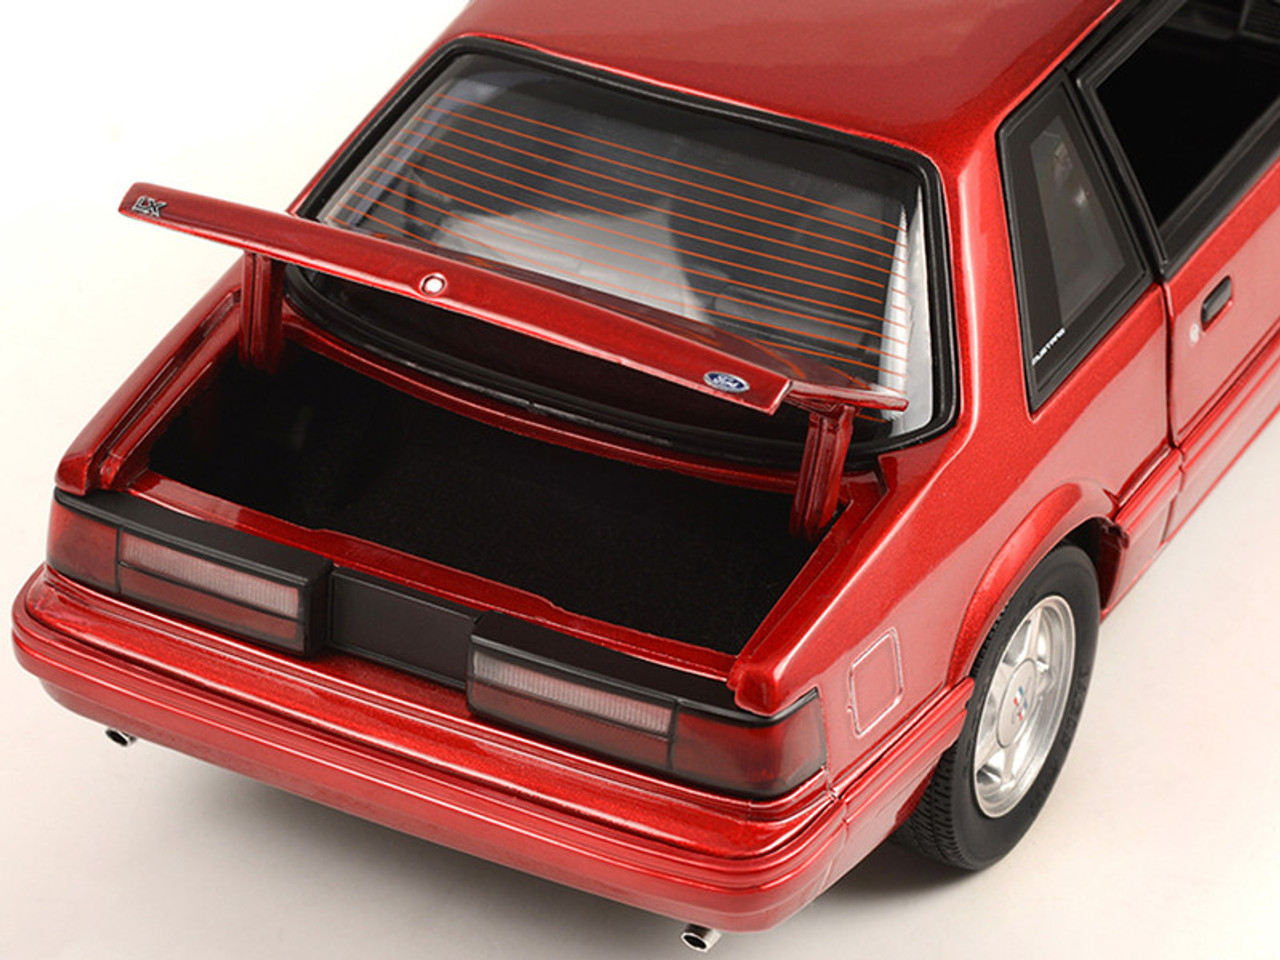 1993 Ford Mustang LX 5.0 - Electric Red with Black Interior - 1:18 Diecast Model Car by GMP